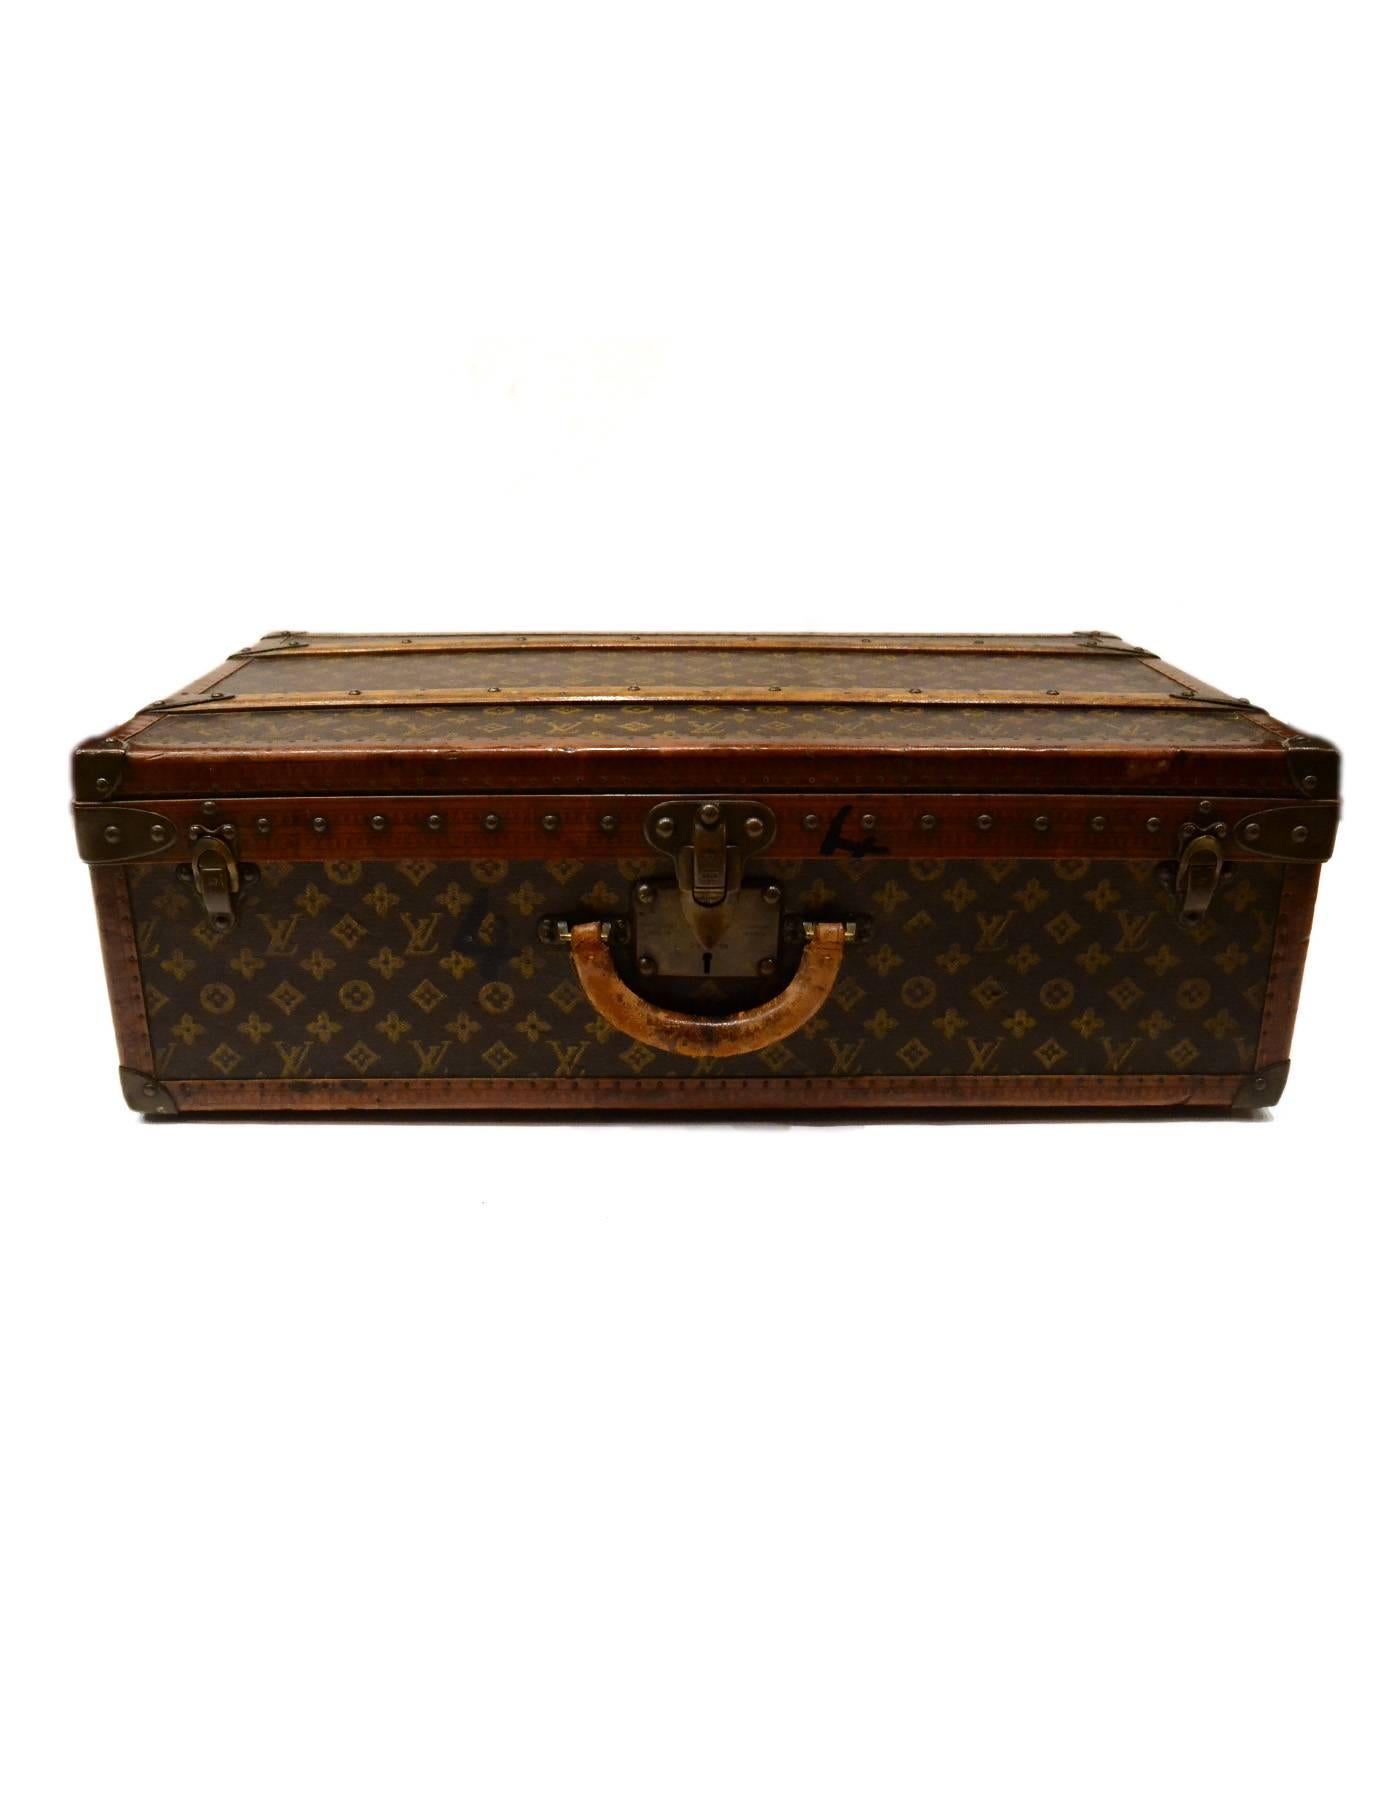 Louis Vuitton Vintage Monogram Hard Suitcase/Trunk
Features optional insert tray

Made In: France
Color: Brown and tan
Hardware: Brass
Materials: Leather, coated canvas, wood and metal
Lining: Brown felt lining
Closure/Opening: Triple trunk latch